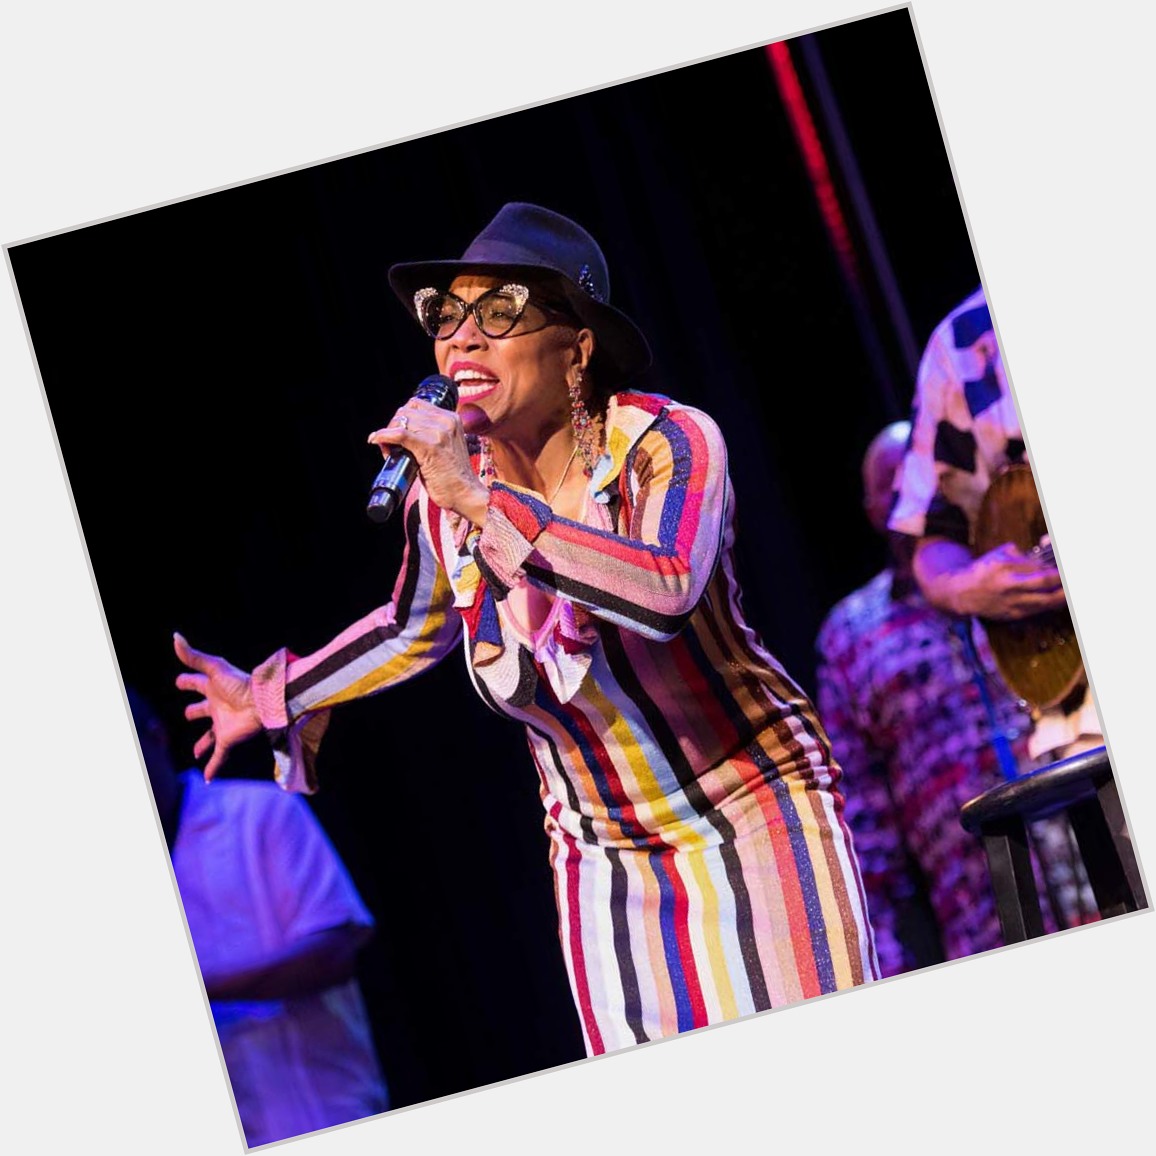 Happy Birthday today to one-of-a-kind vocalist Dee Dee Bridgewater, who sailed with us on Blue Note at Sea 18. 